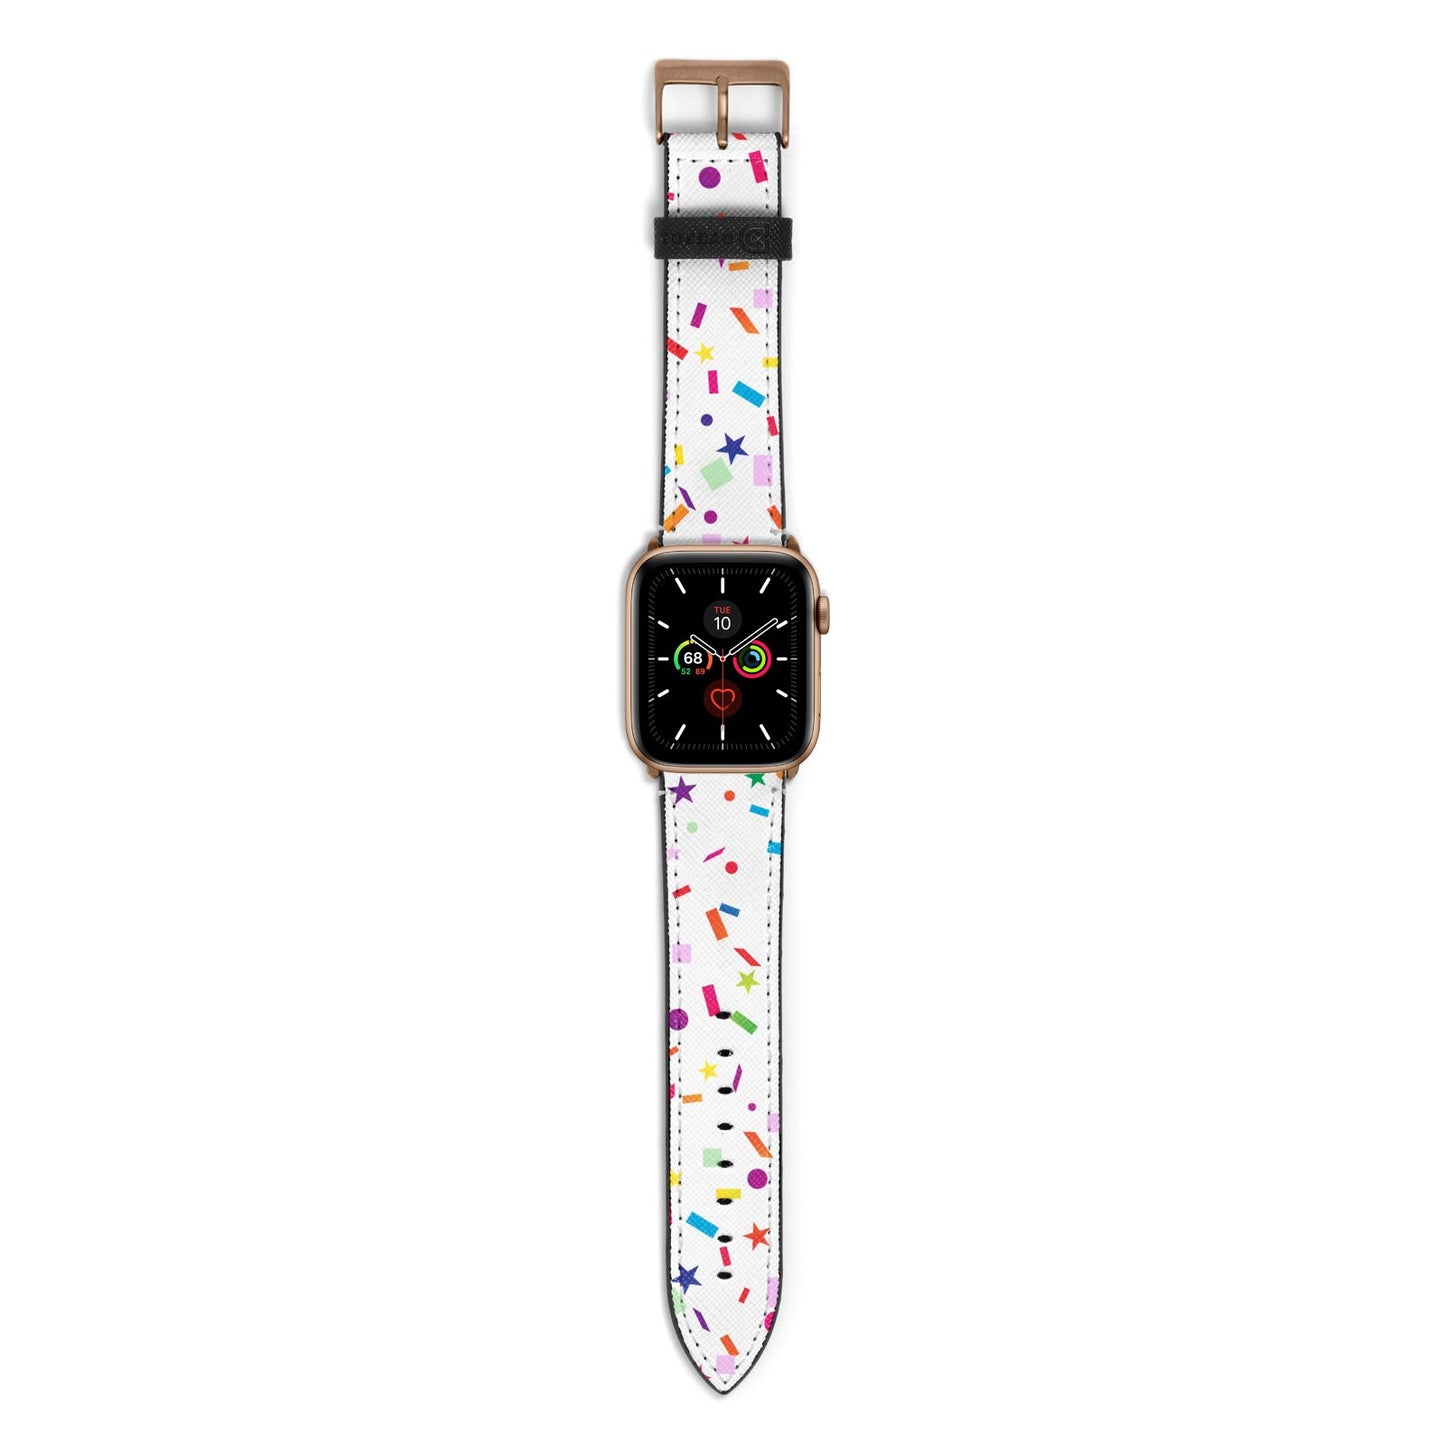 Confetti Apple Watch Strap with Gold Hardware